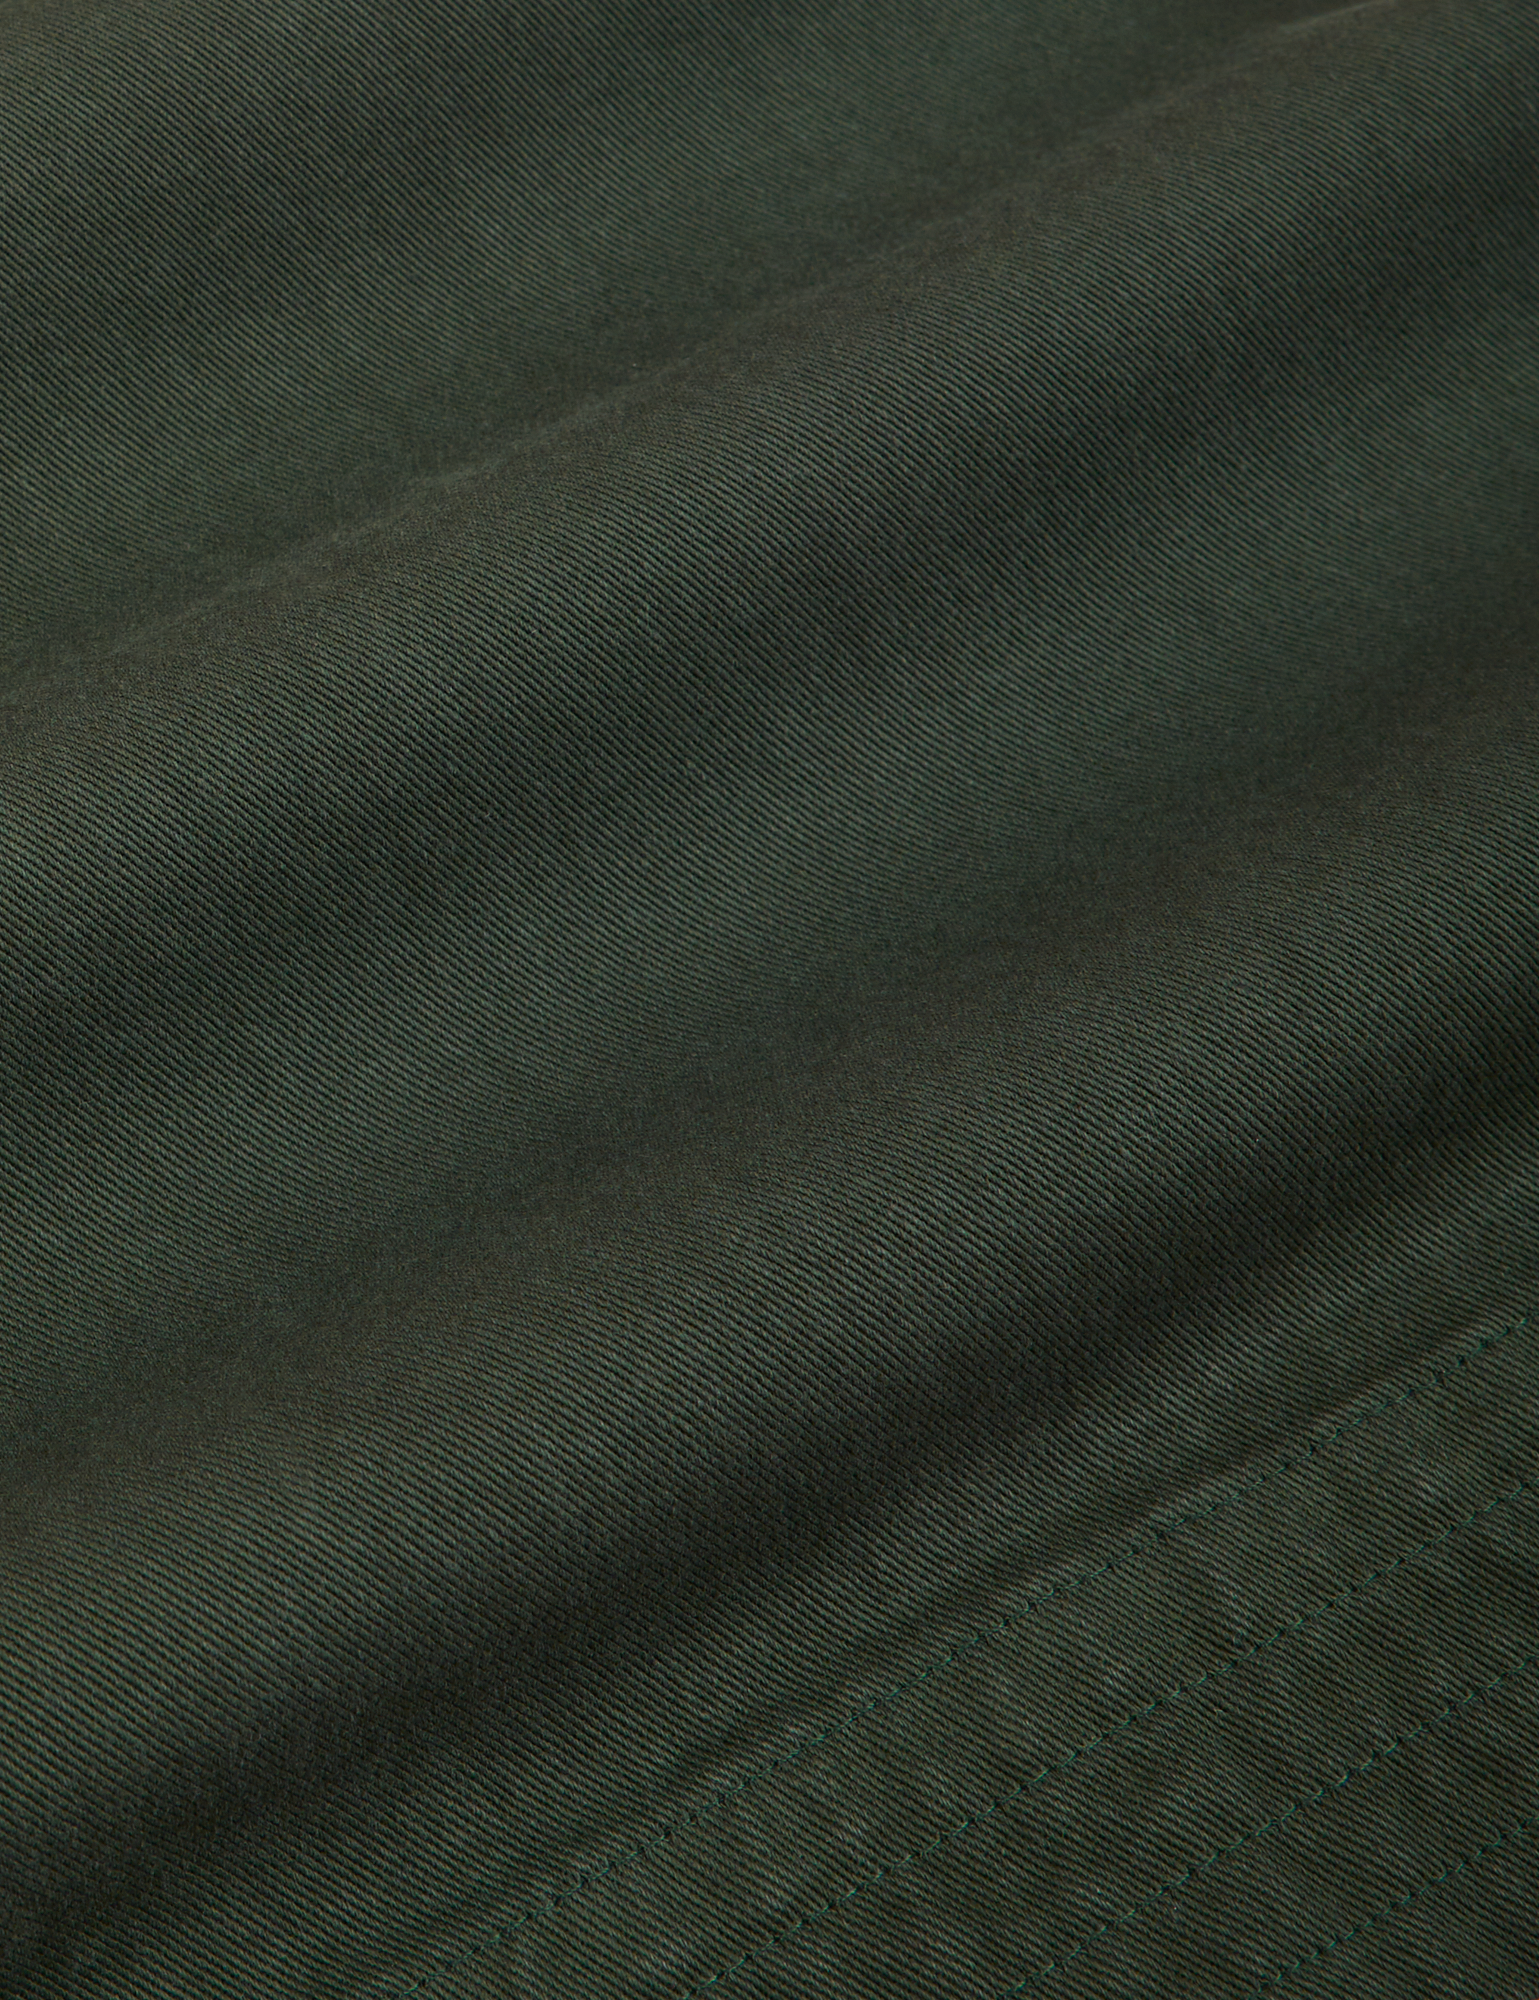 Action Pants in Swamp Green fabric detail close up